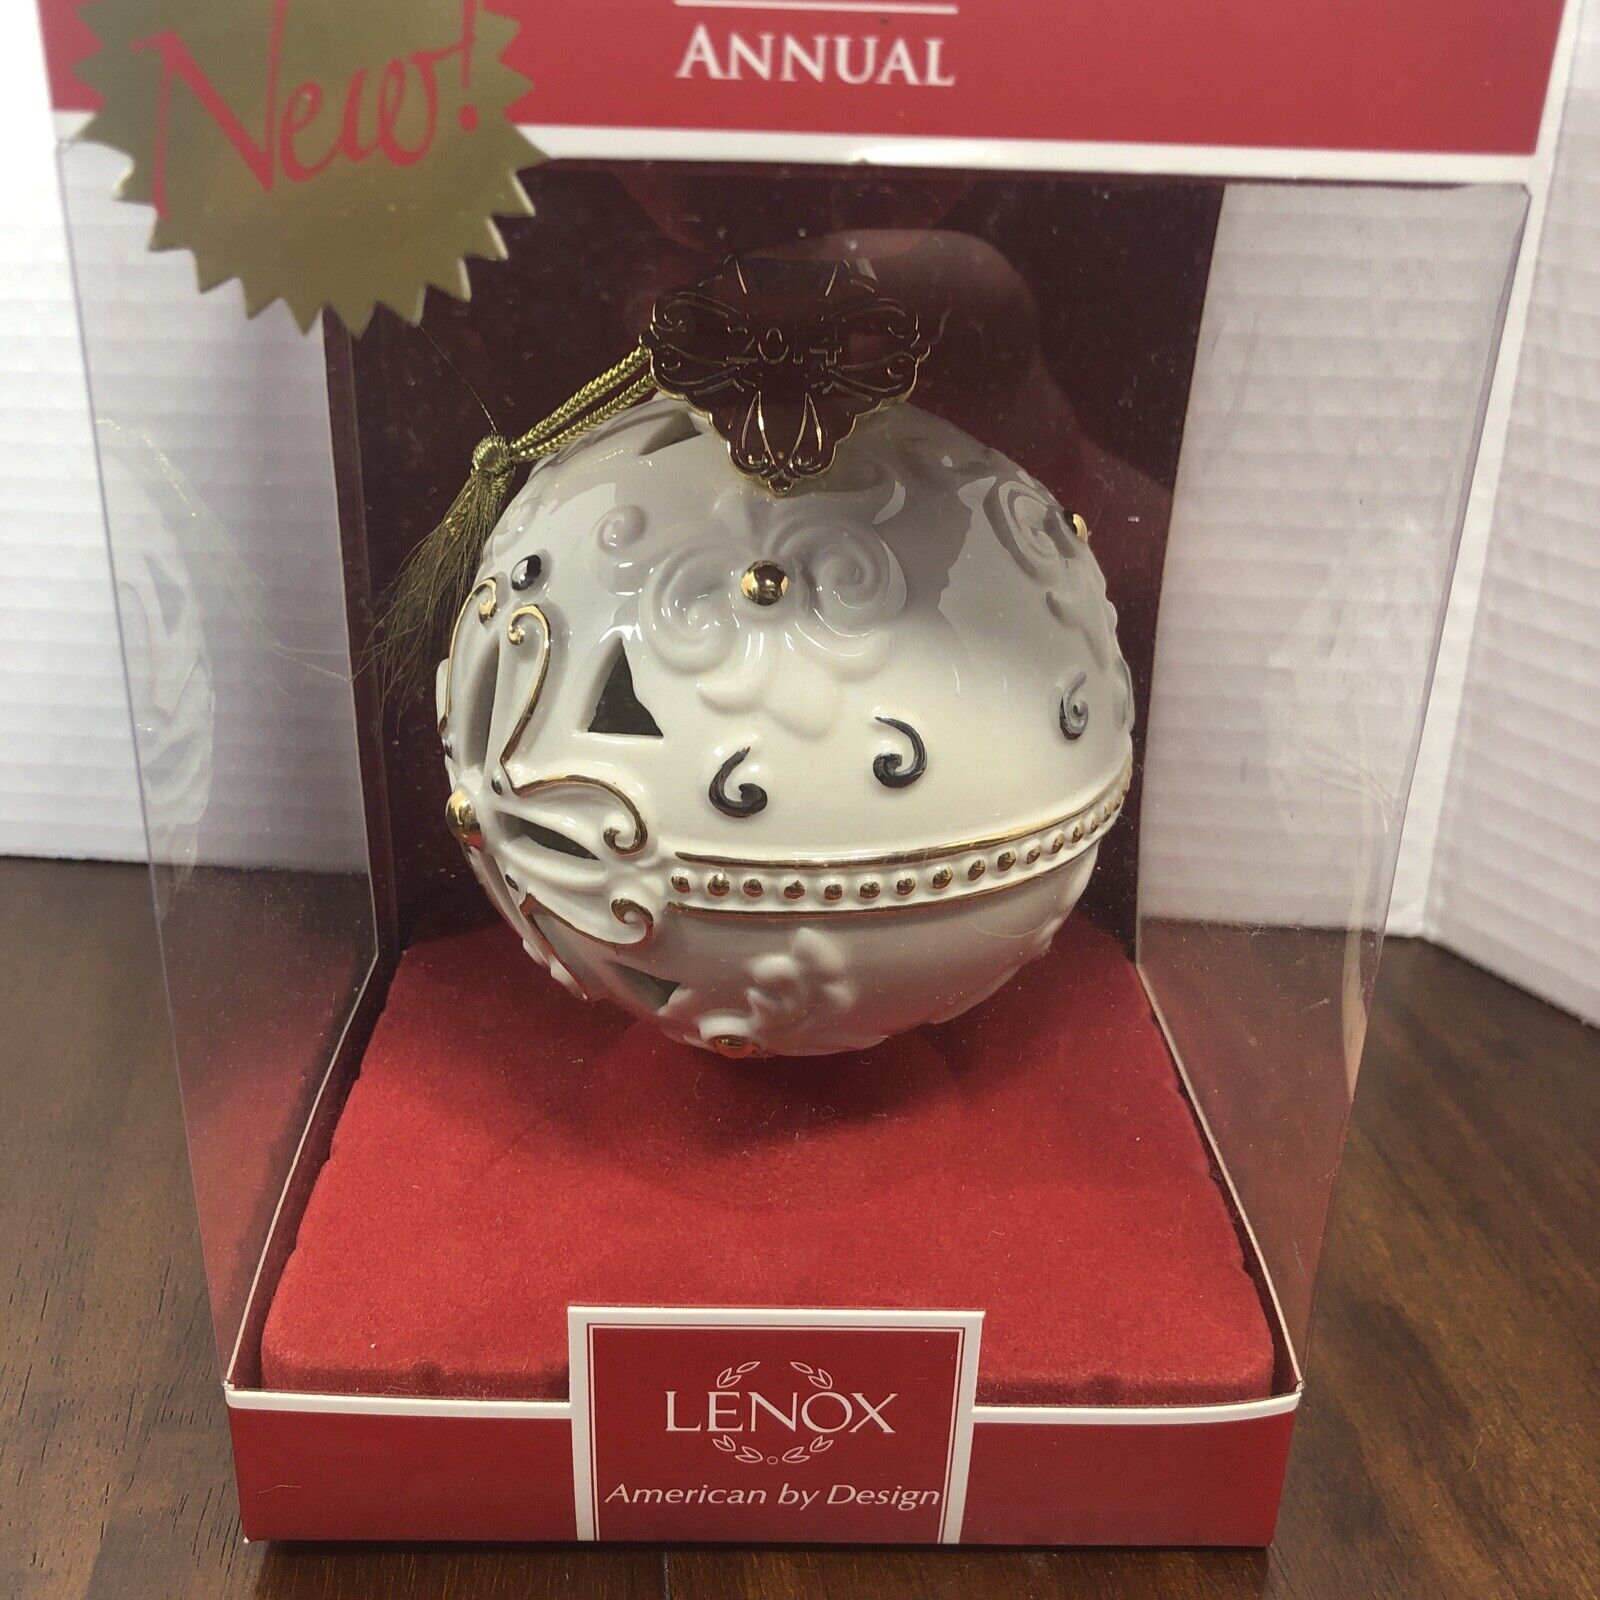 Lenox 2014 Annual Holiday Christmas Ornament Pierced Ornate Gold Accents Ball